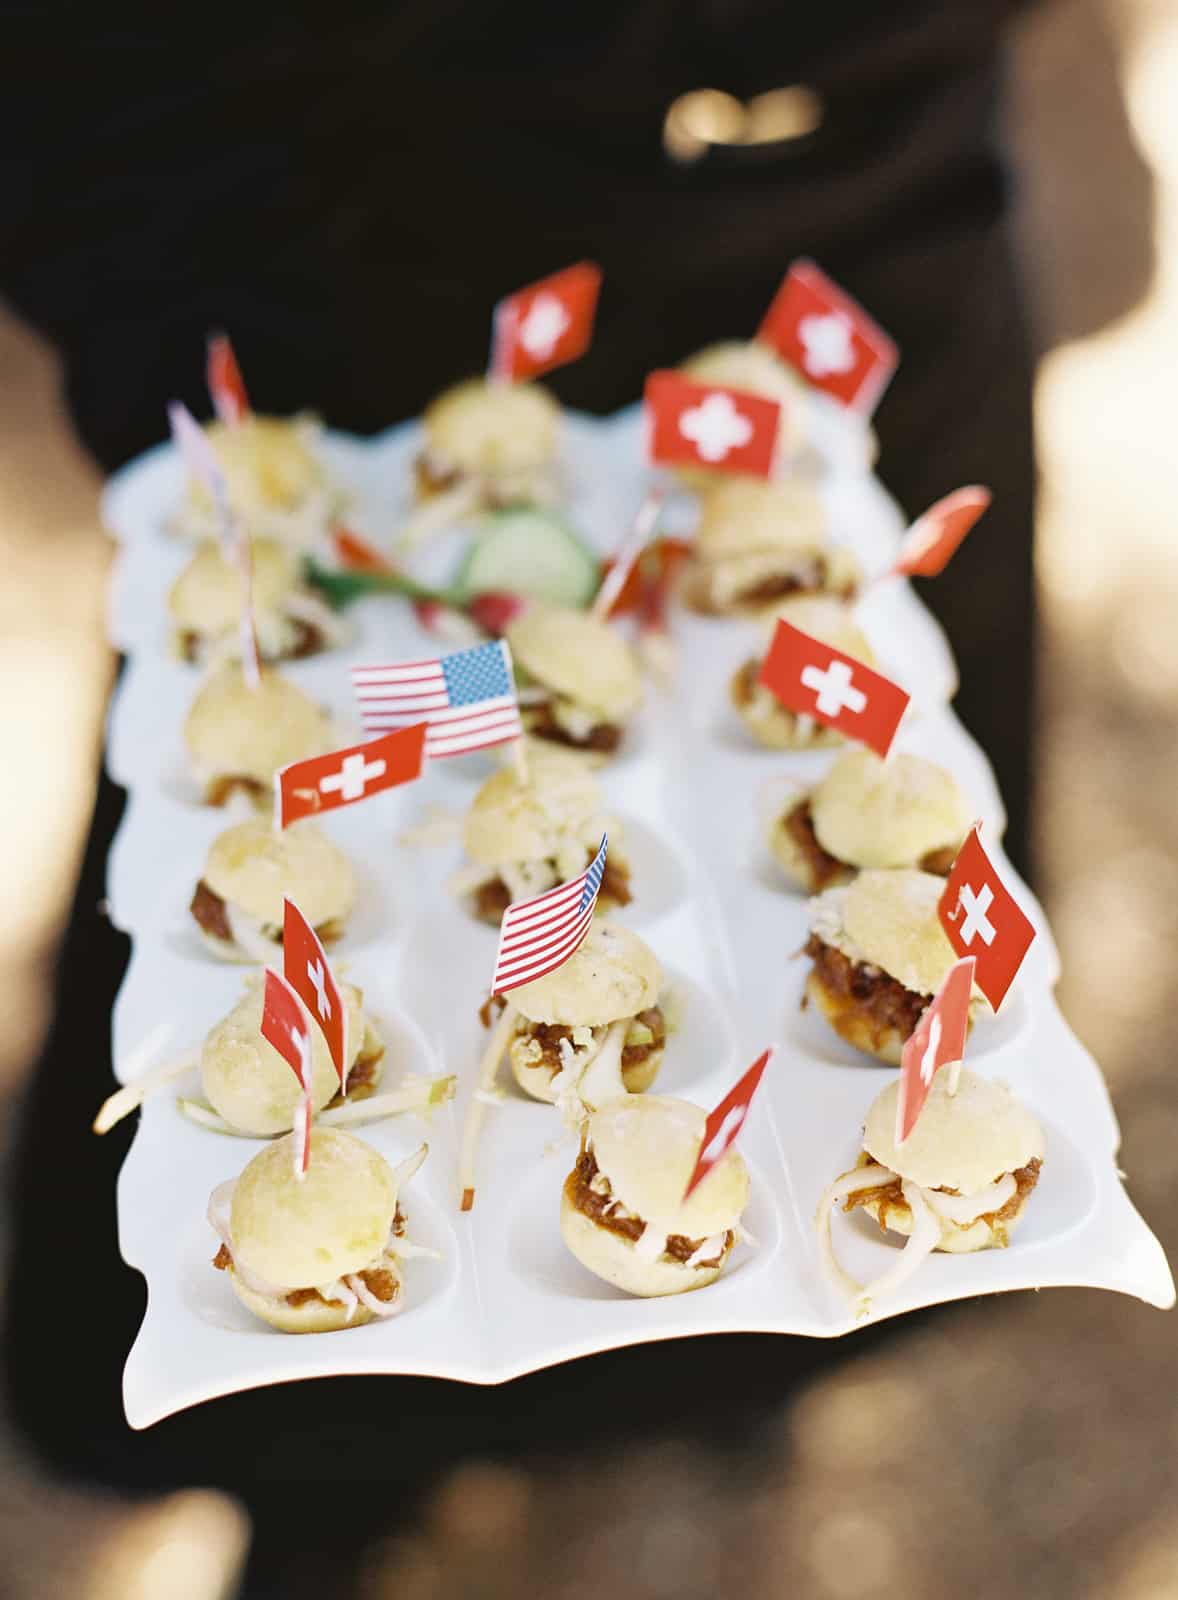 slider appetizers with swiss and american flags